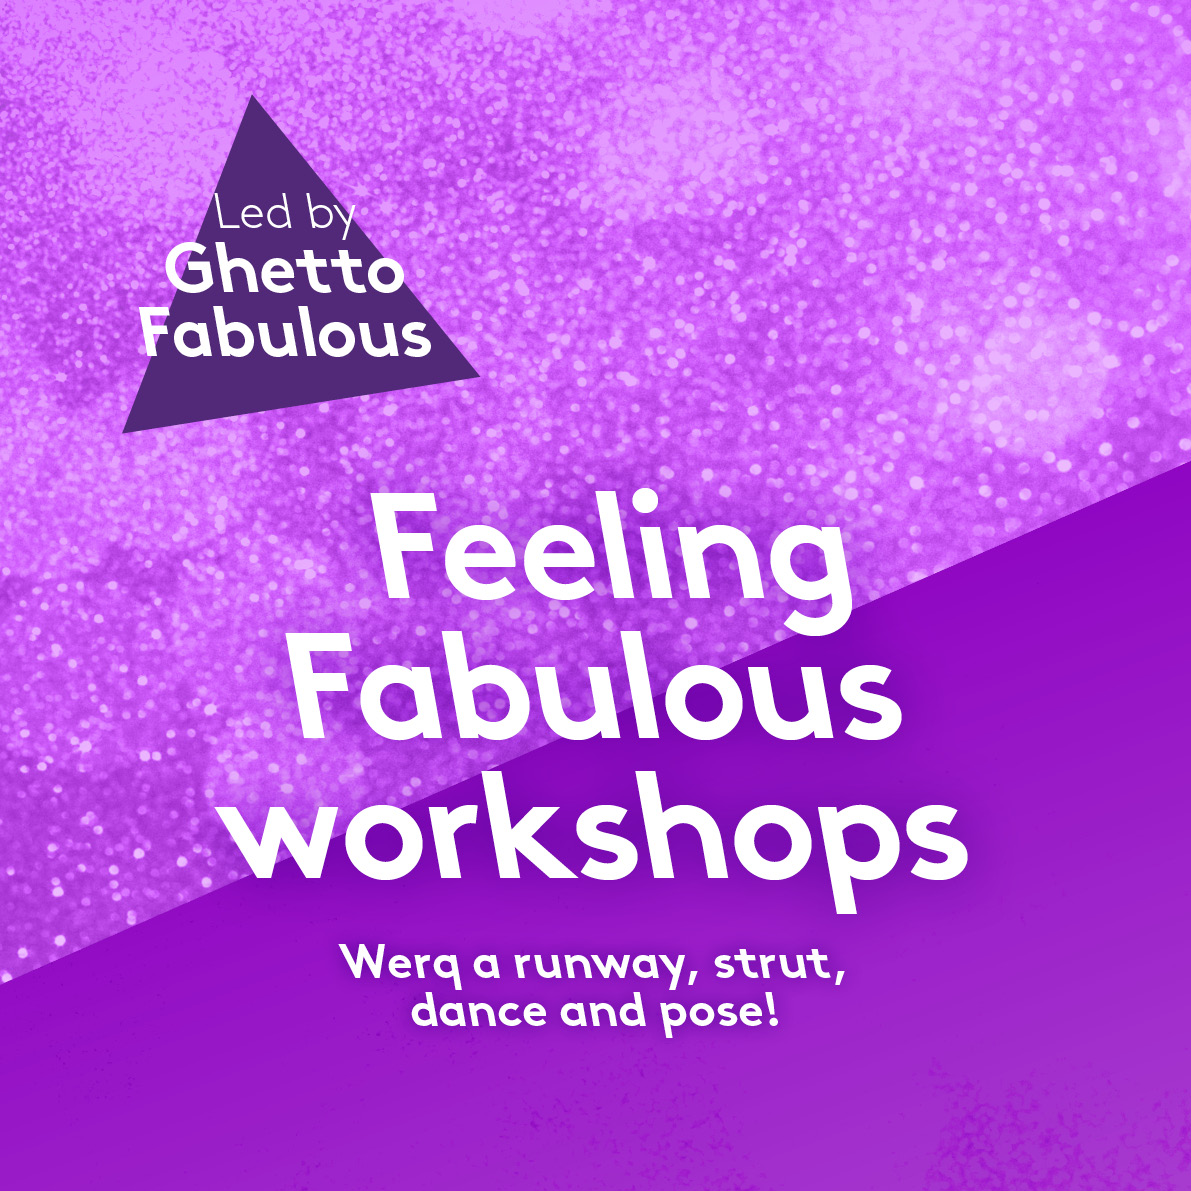 A purple two - tone poster with a diagonal colour block effect has the words Feeling Fabulous Workshops in white text in the centre. Some of the purple has a glitter texture. Below are the words Werk a runway, strut, dance and pose!